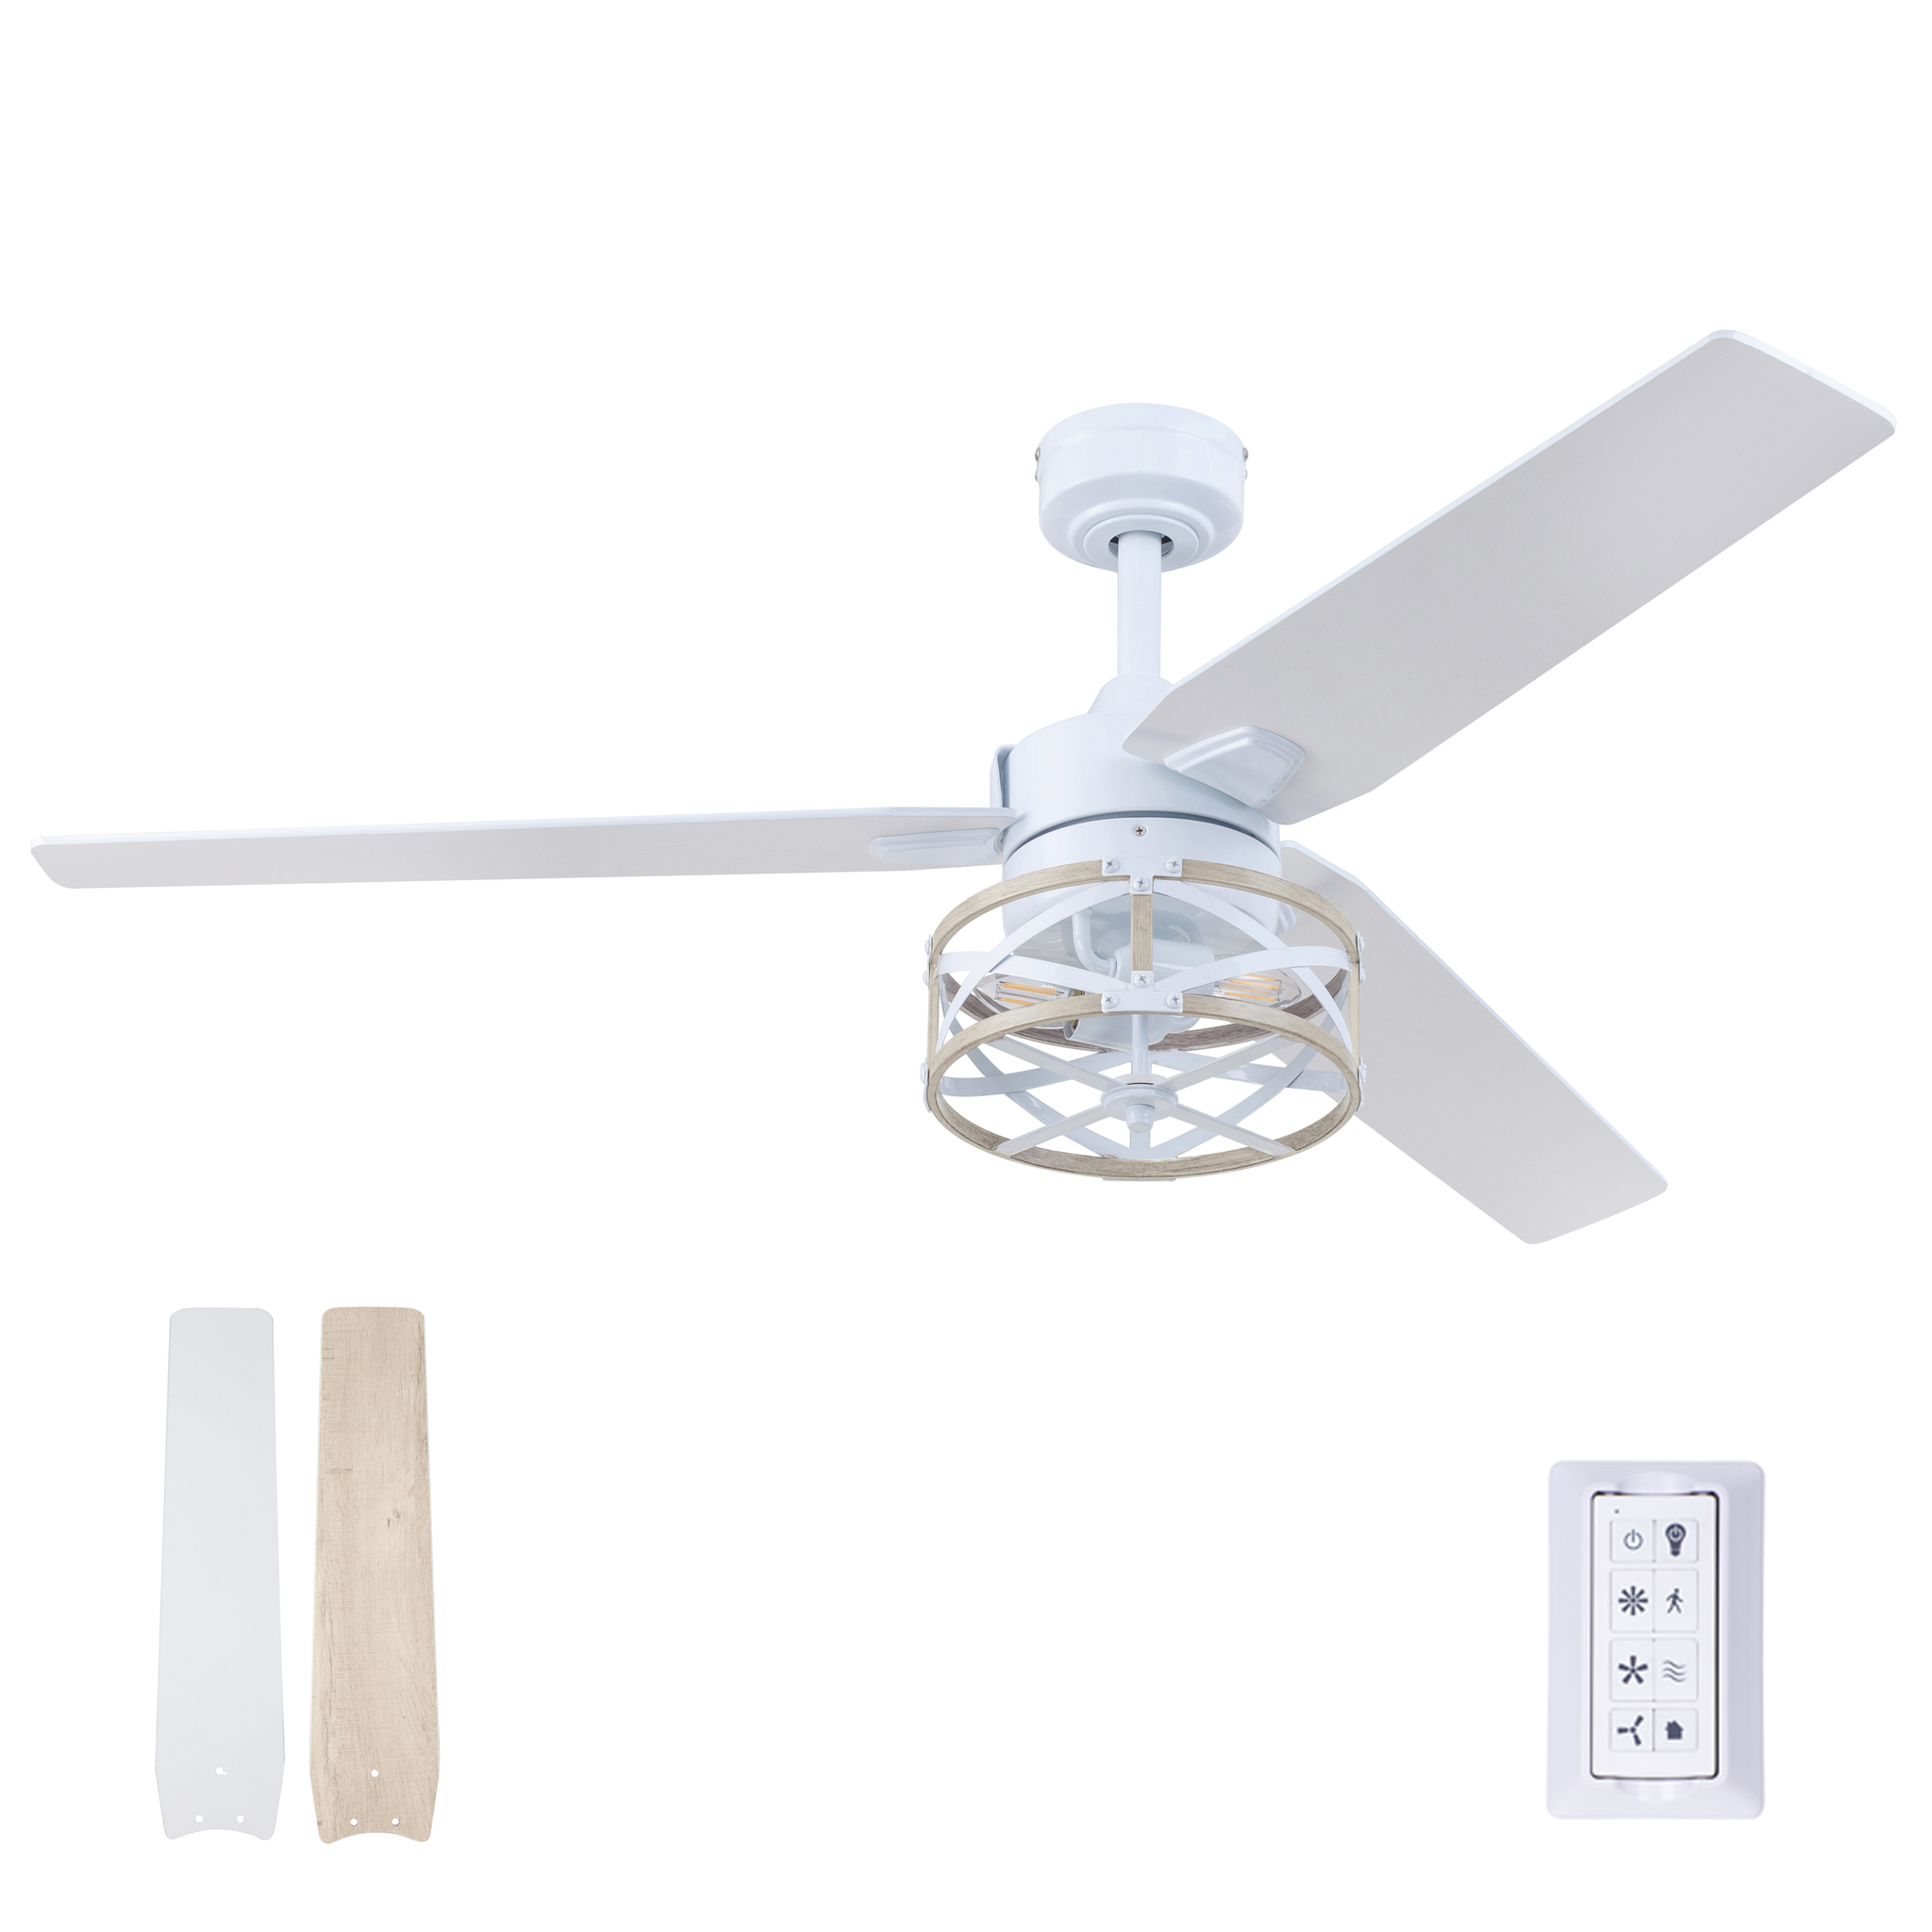 52 Inch Thedas, White, Remote Control, Ceiling Fan by Prominence Home